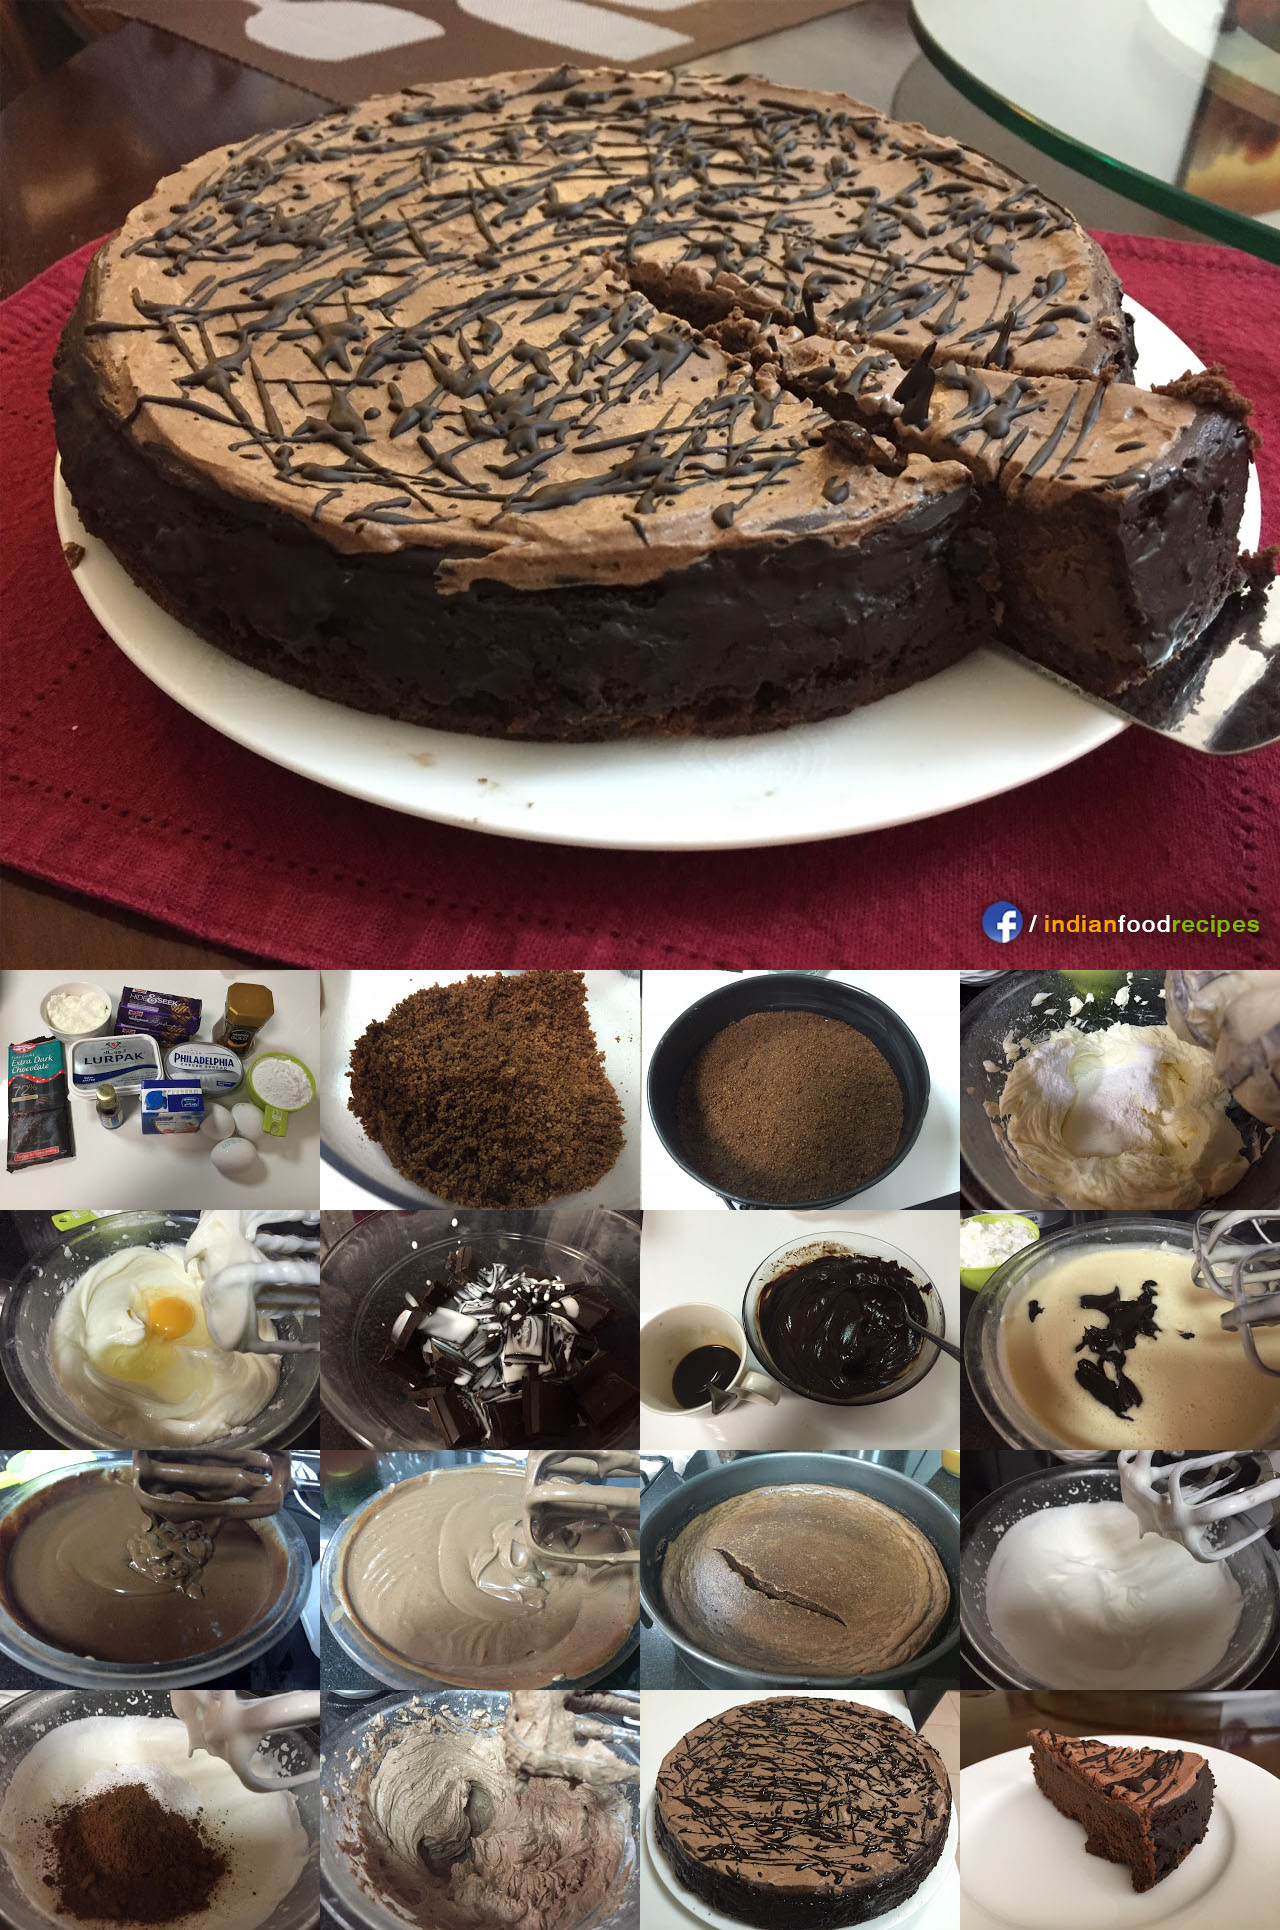 Chocolate Cheesecake (Baked) recipe step by step